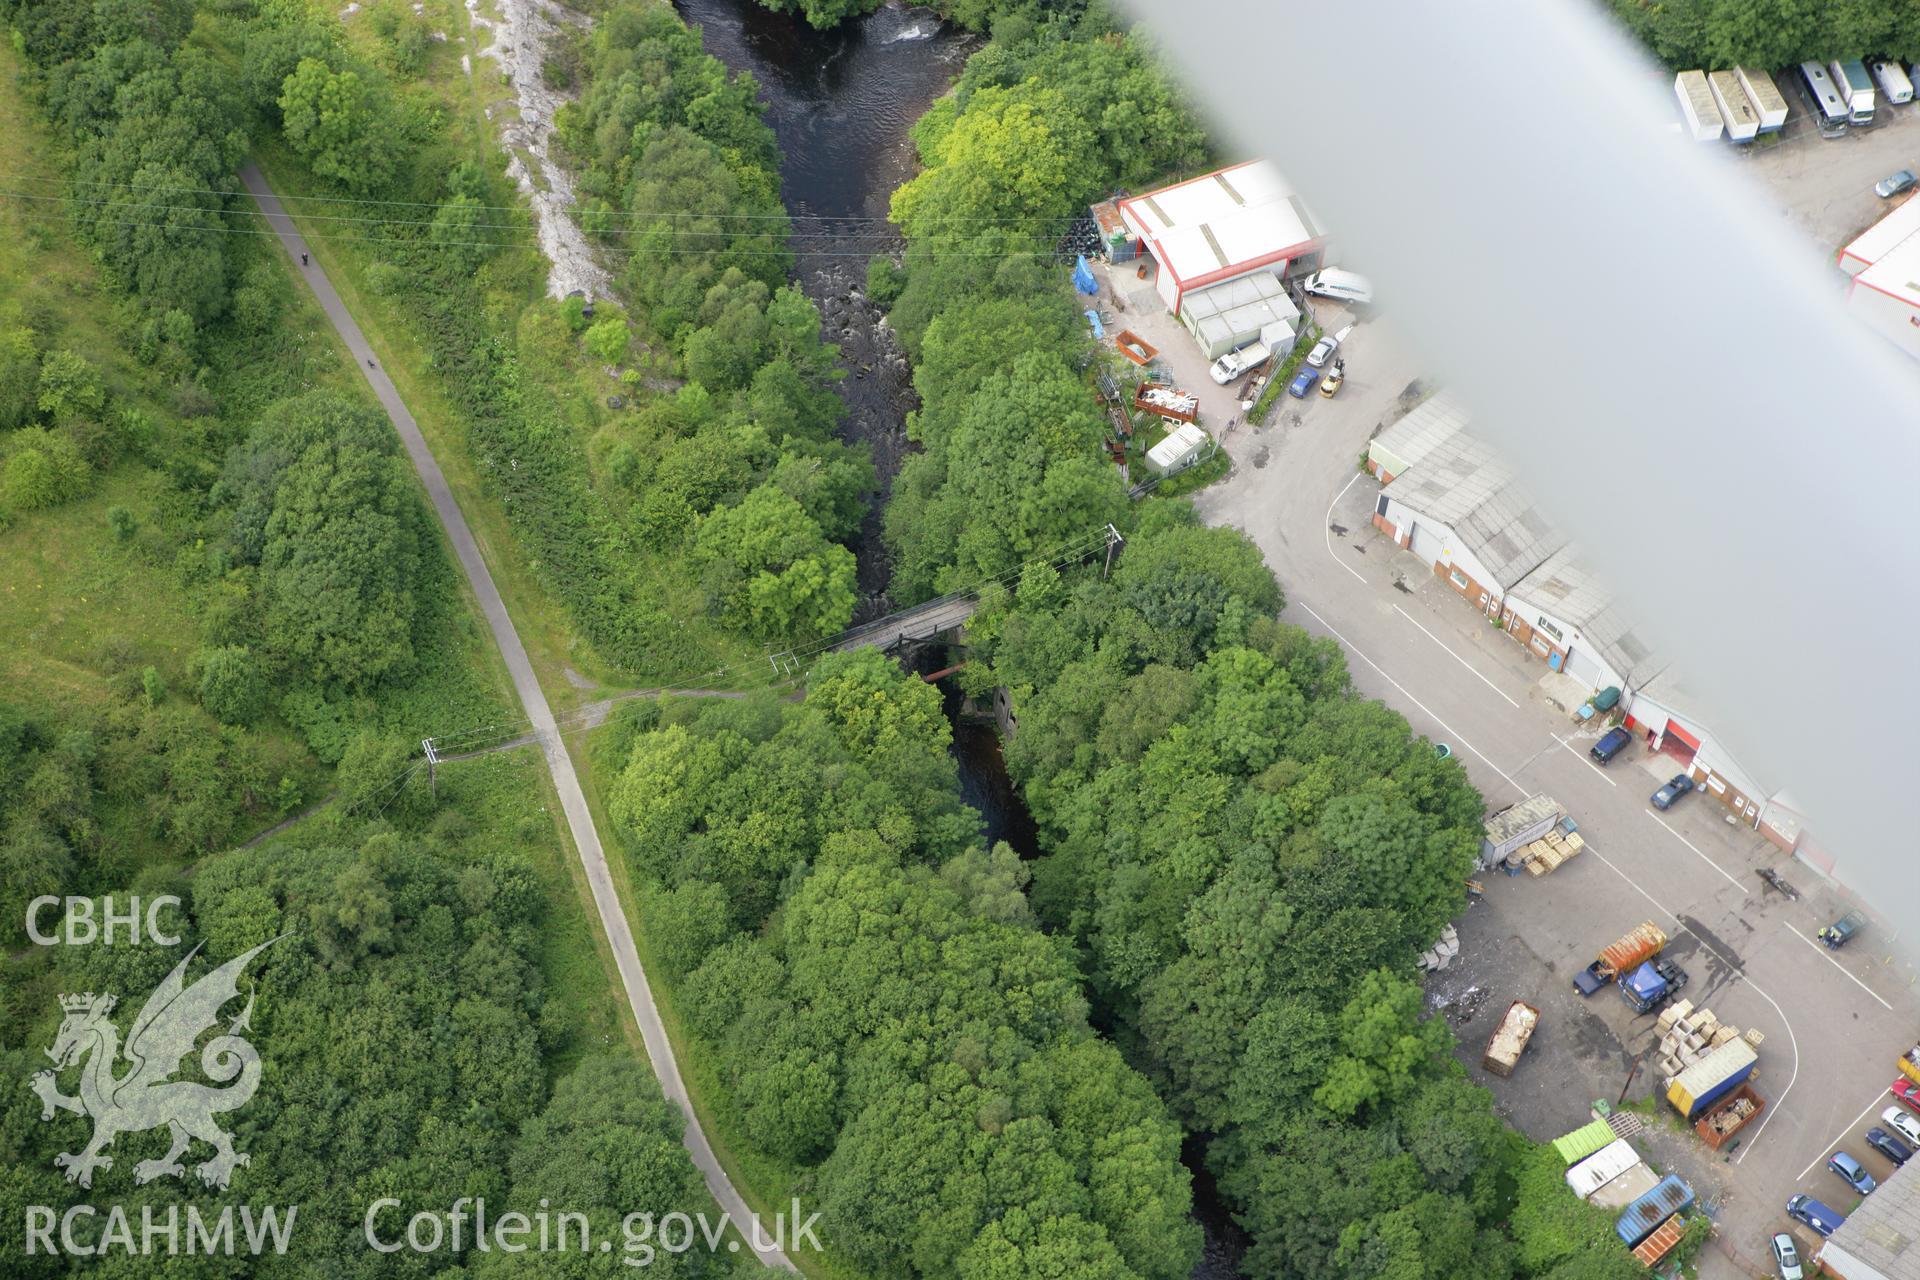 RCAHMW colour oblique aerial photograph of Pont-y-Cafnau, Merthyr Tydfil. Taken on 30 July 2007 by Toby Driver